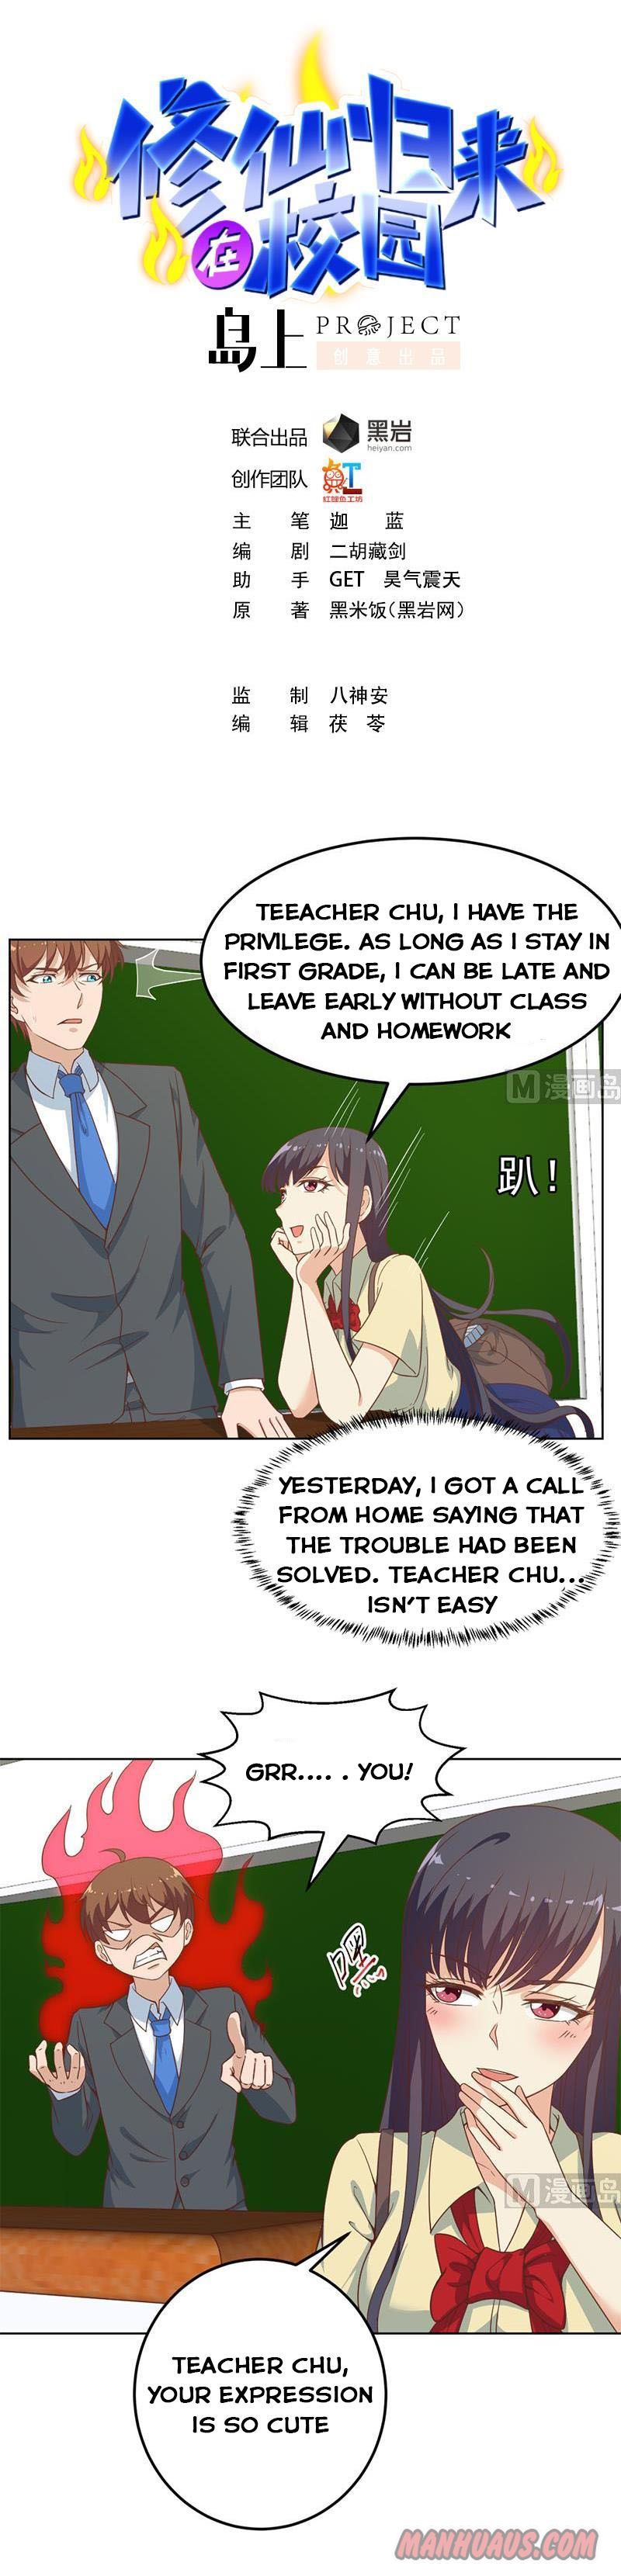 Cultivation Return on Campus Chapter 53 page 1